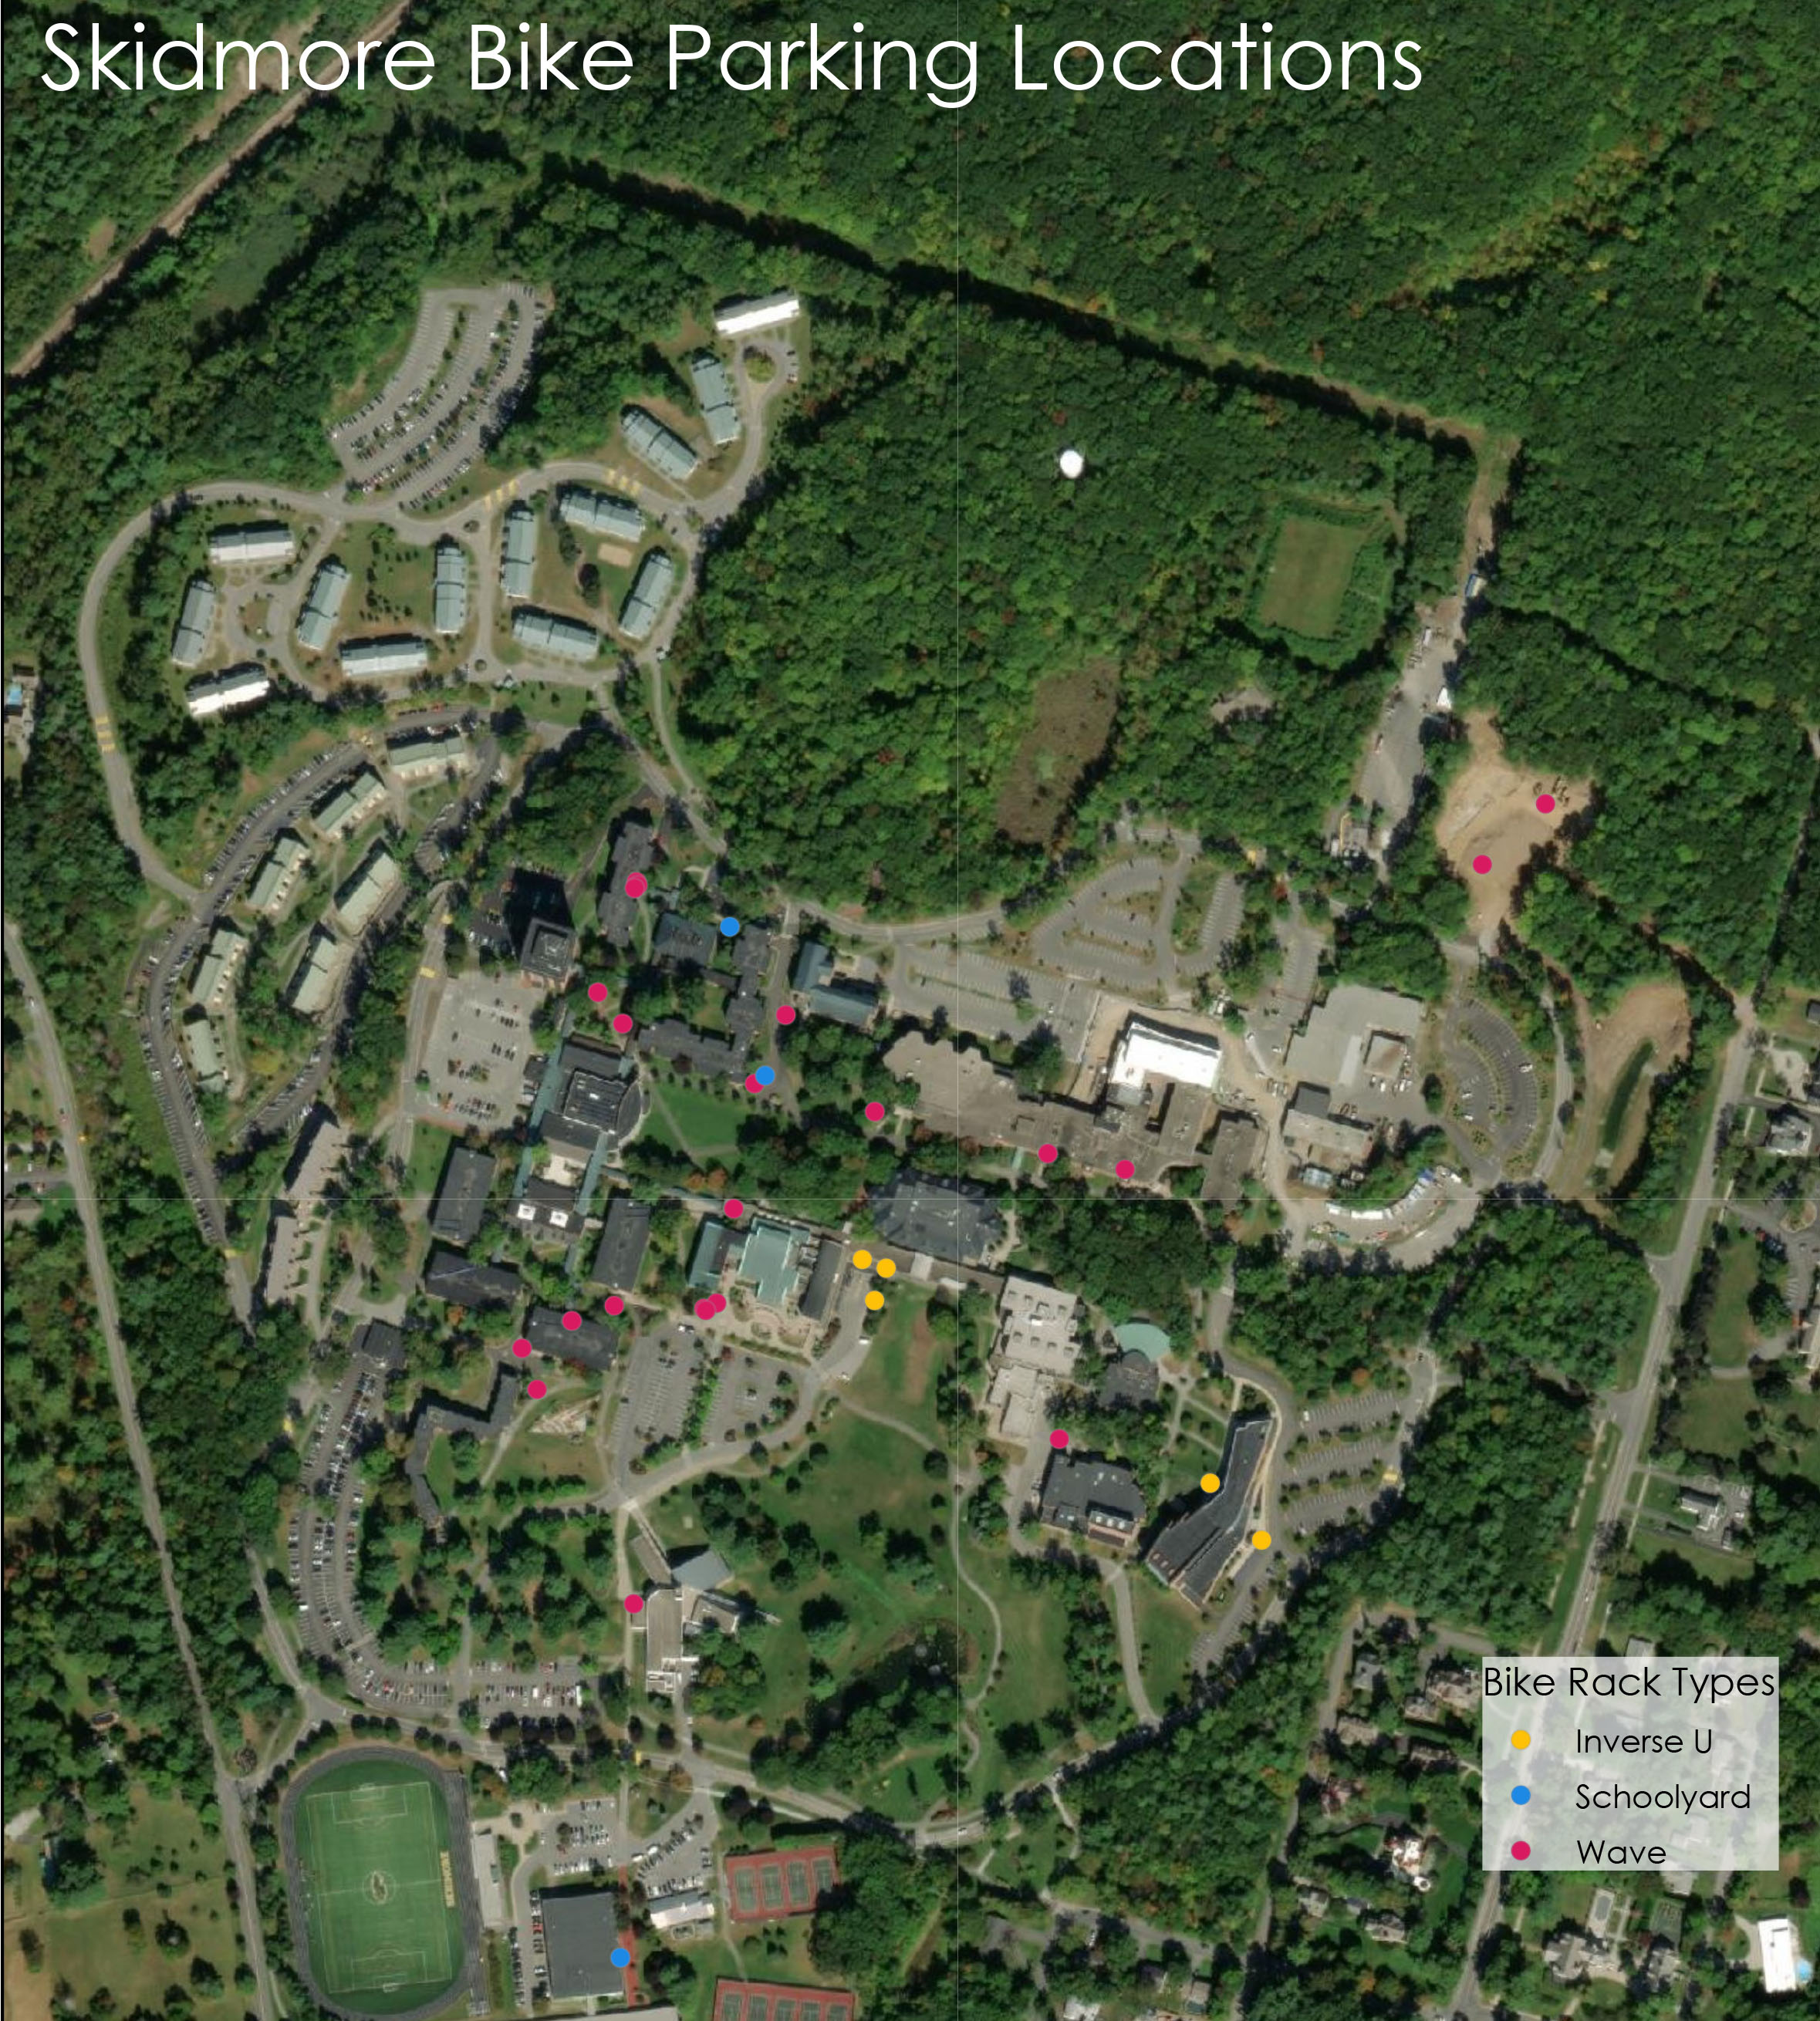 Map of central campus demonstrates the location of bike racks, most of them being by academic buildings such as Palamountain and Case Center.